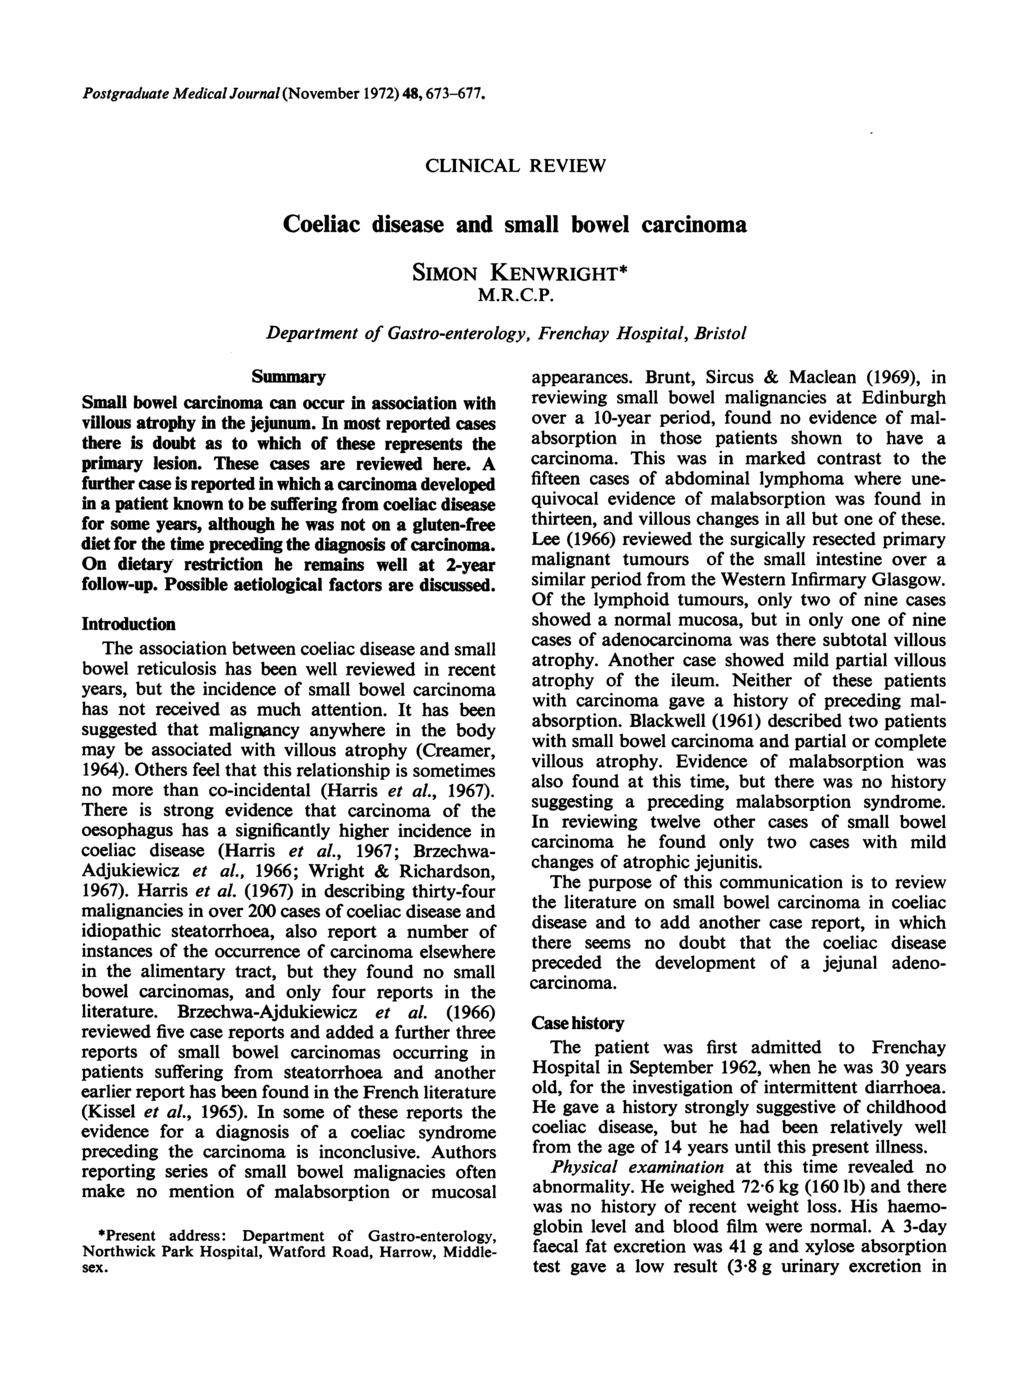 Postgraduate Medical Journal (November 1972) 48, 673-677. Coeliac disease CLINICAL REVIEW and small bowel carcinoma SIMON KENWRIGHT* M.R.C.P. Department of Gastro-enterology, Frenchay Hospital, Bristol Summary Small bowel carcinoma can occur in association with villous atrophy in the jejunum.